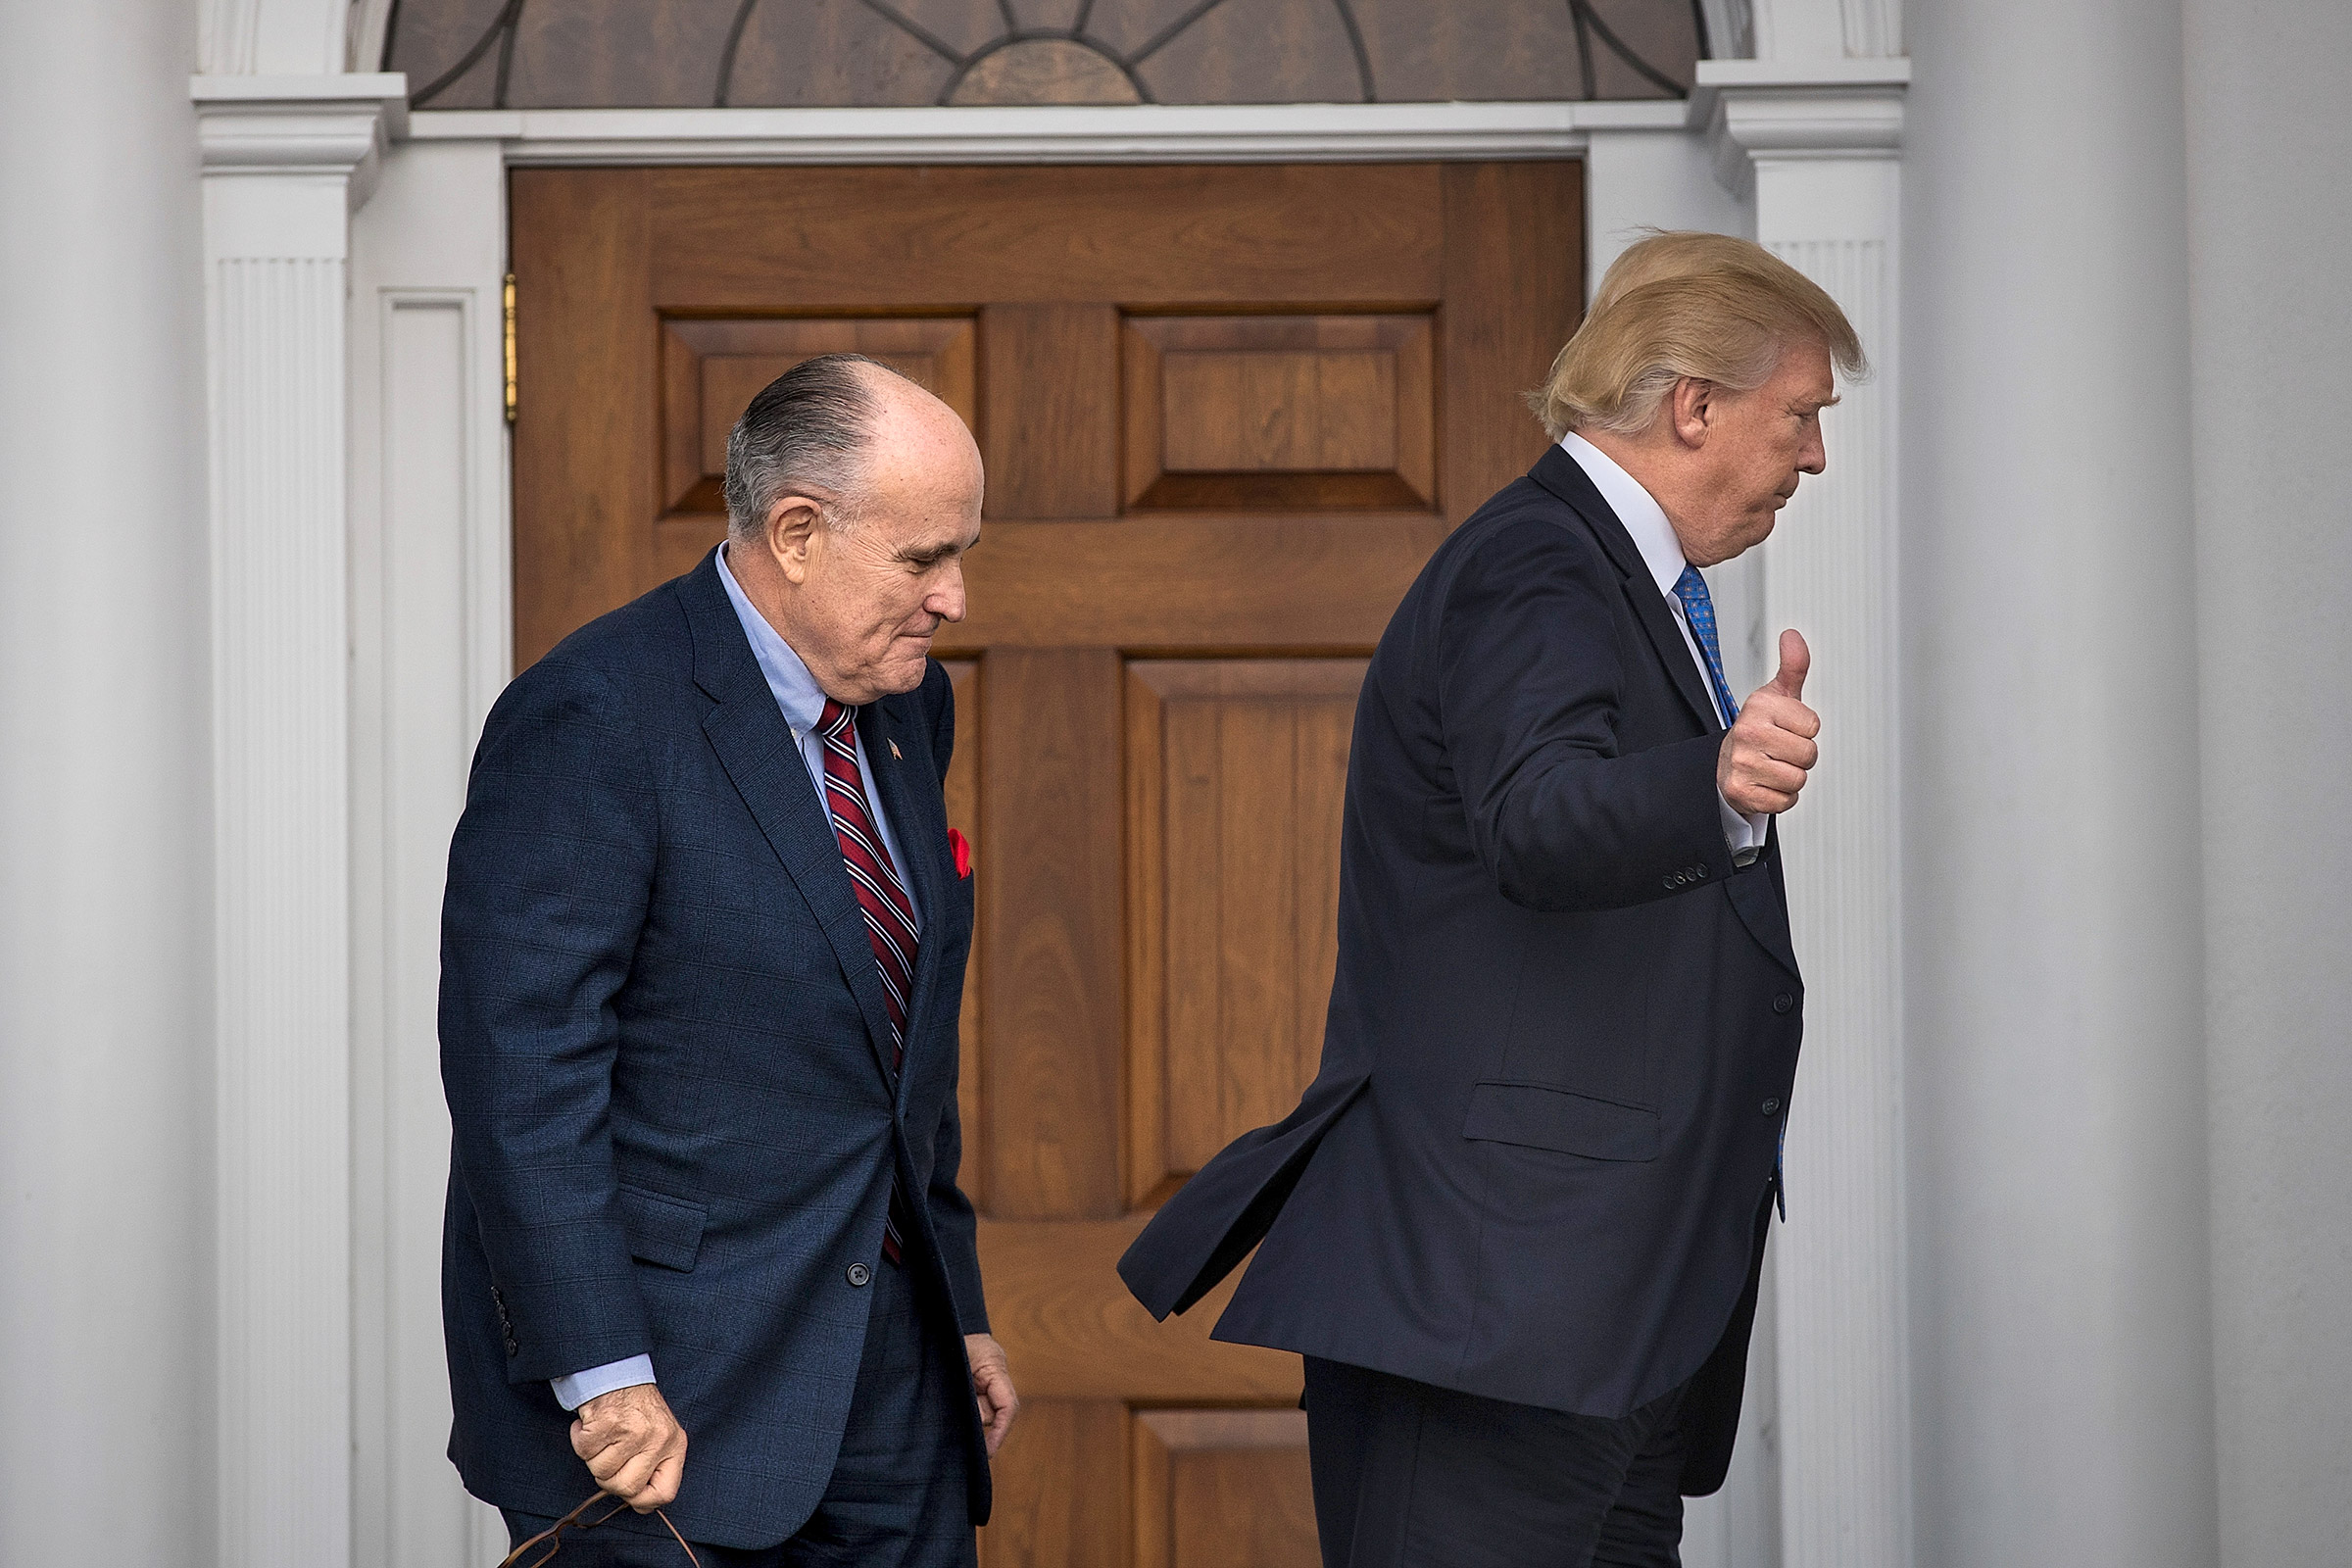 Trump and Giuliani walk out of Trump’s golf club in Bedminster, N.J. on Nov. 20, 2016 (Drew Angerer—Getty Images)